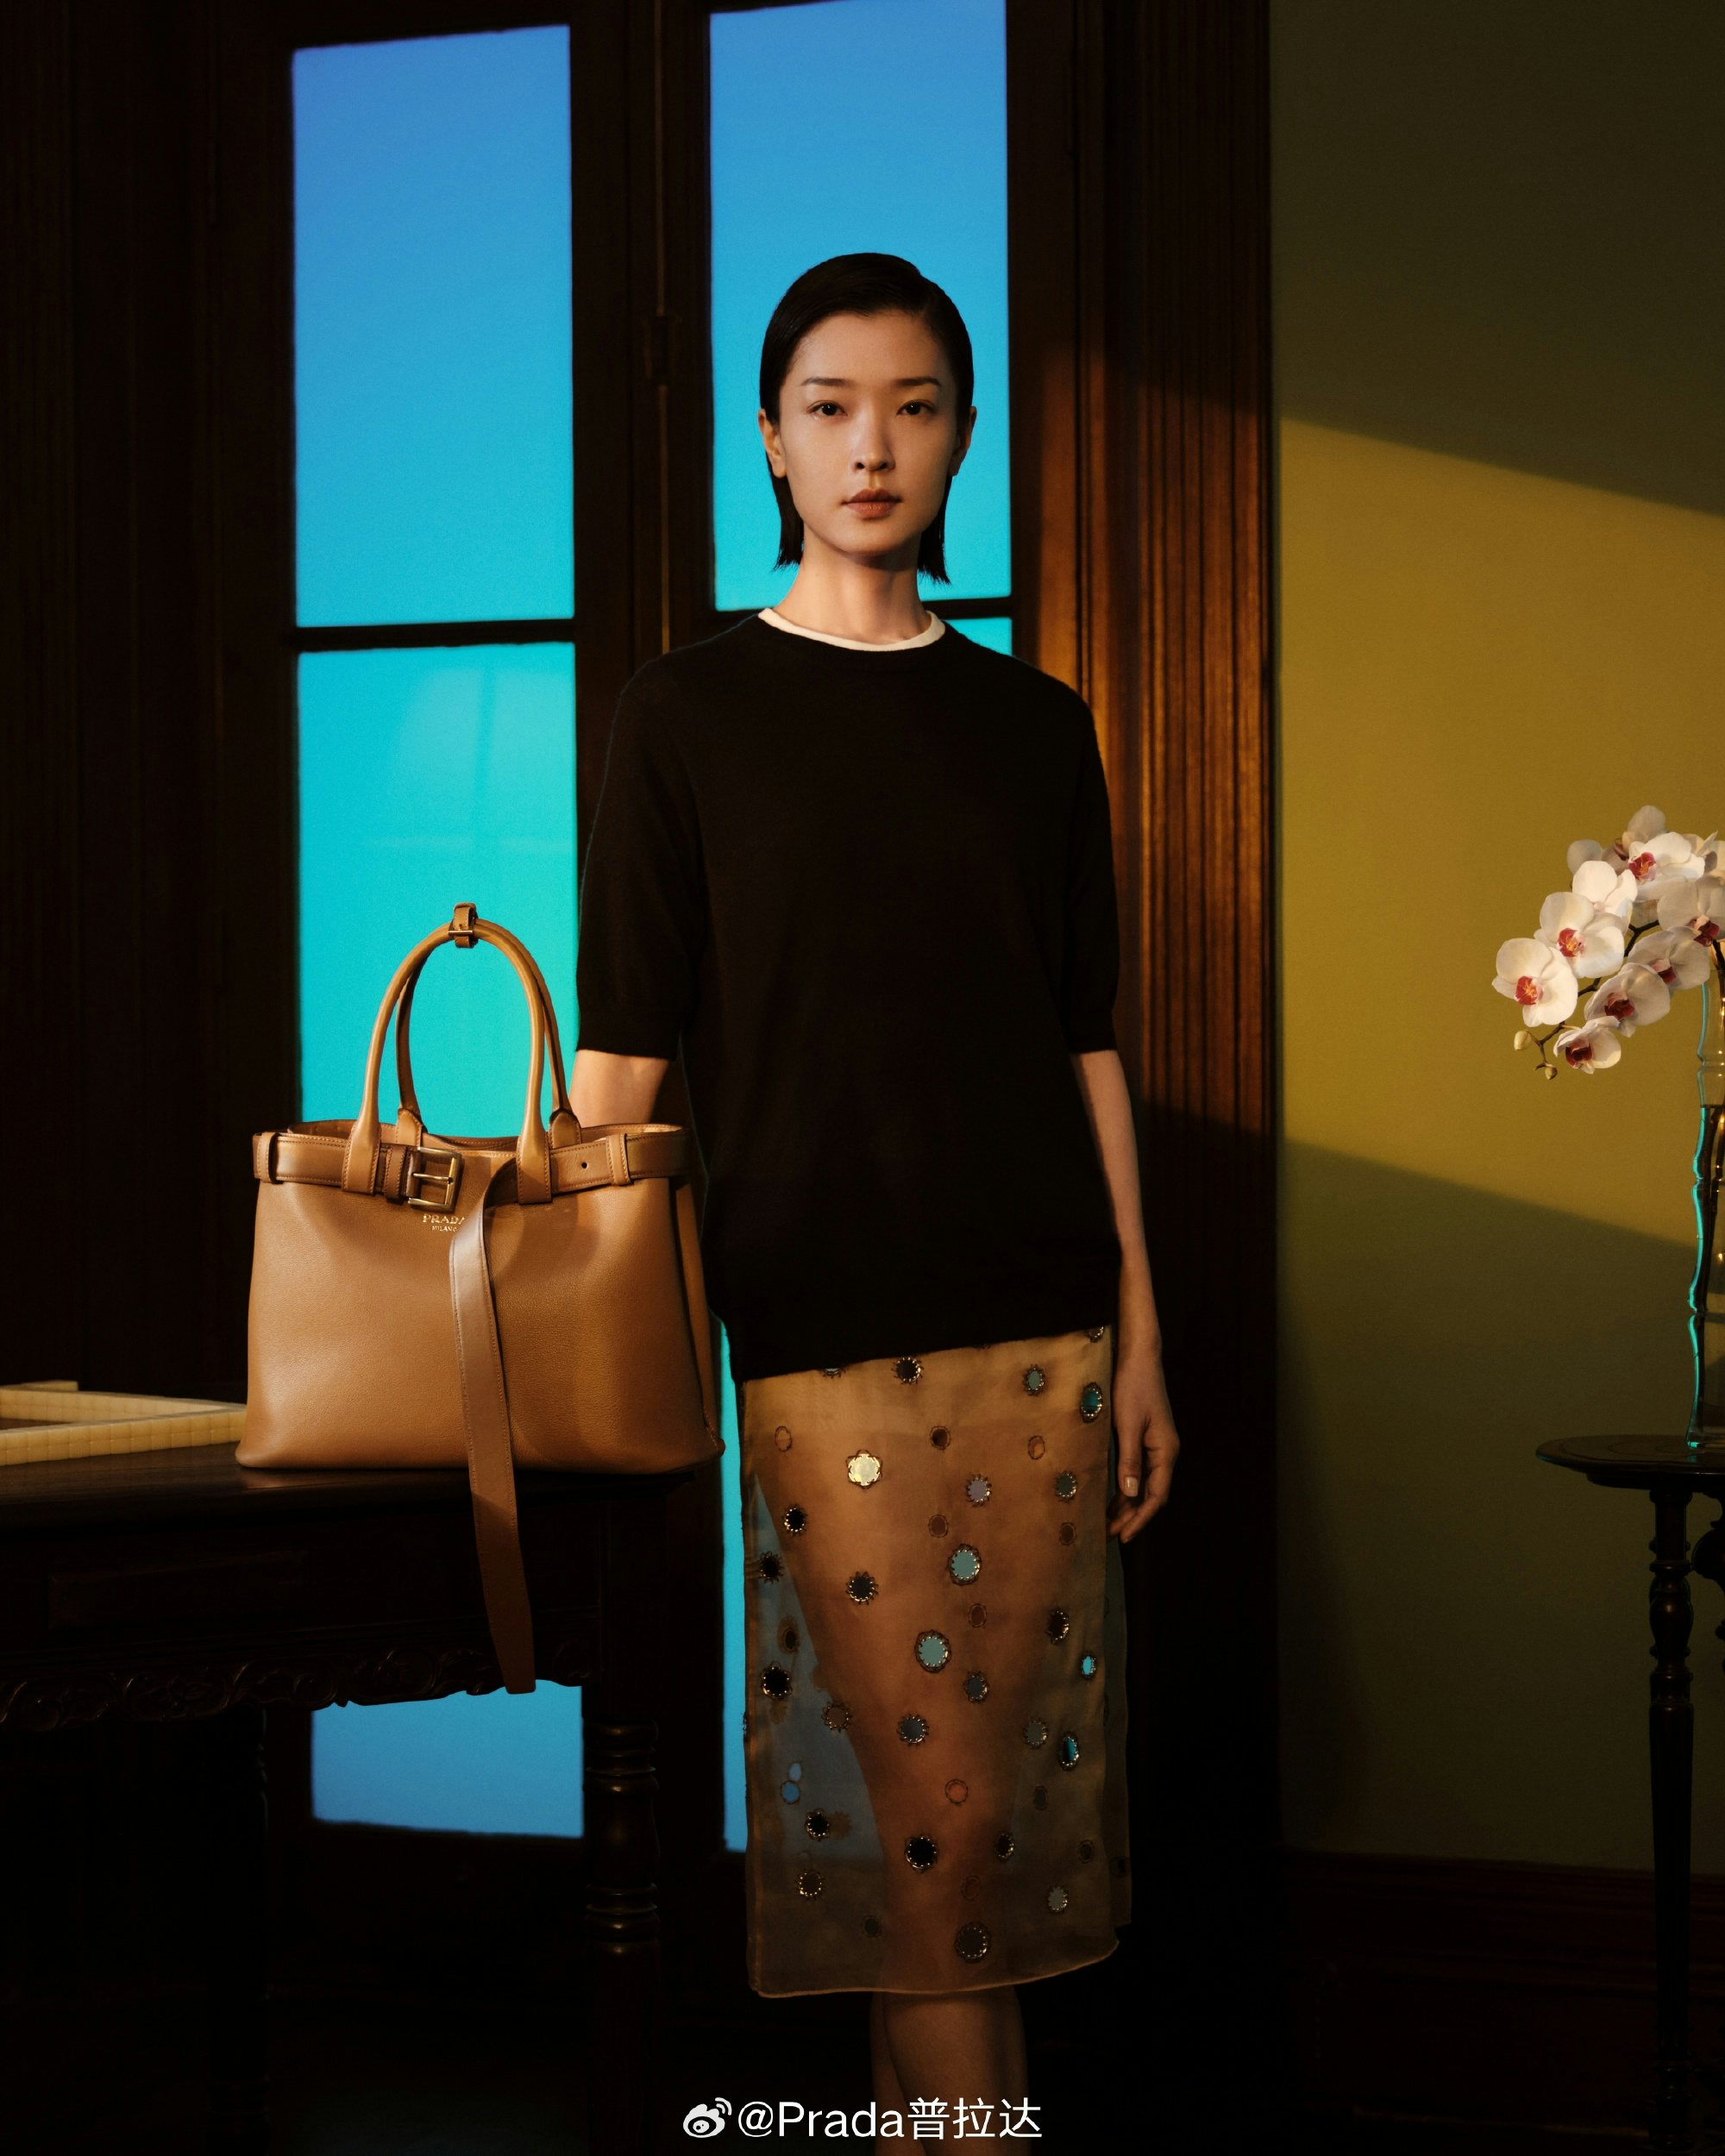 Prada deploys Chinese supermodel Du Juan, who appears as a character in the show, and local celebrity director/photographer Leslie Zhang. Image: Prada